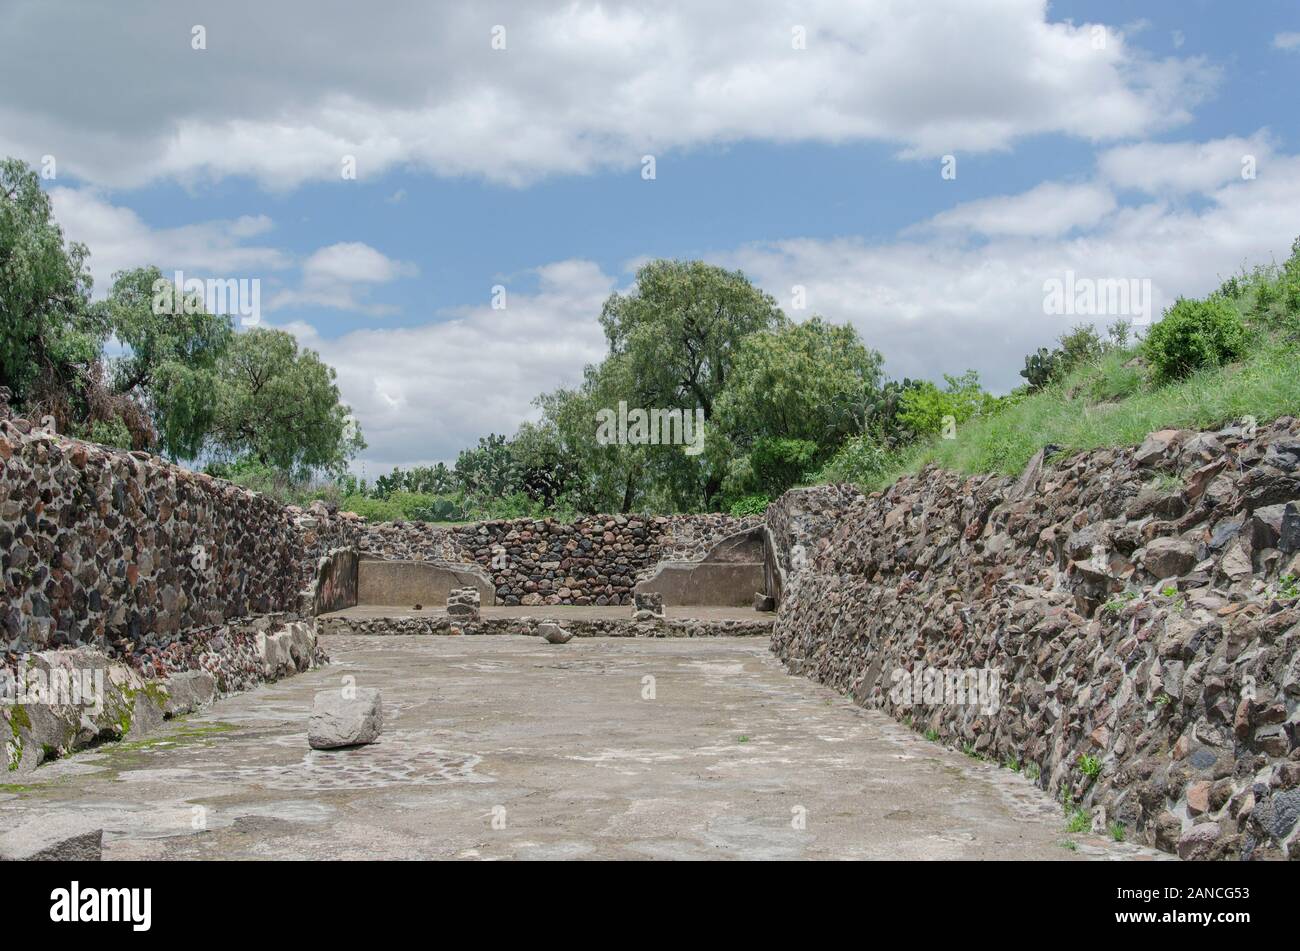 Prehispanic ruins in Teotihuacan, an ancient Mesoamerican city located in a sub-valley of the Valley of Mexico Stock Photo